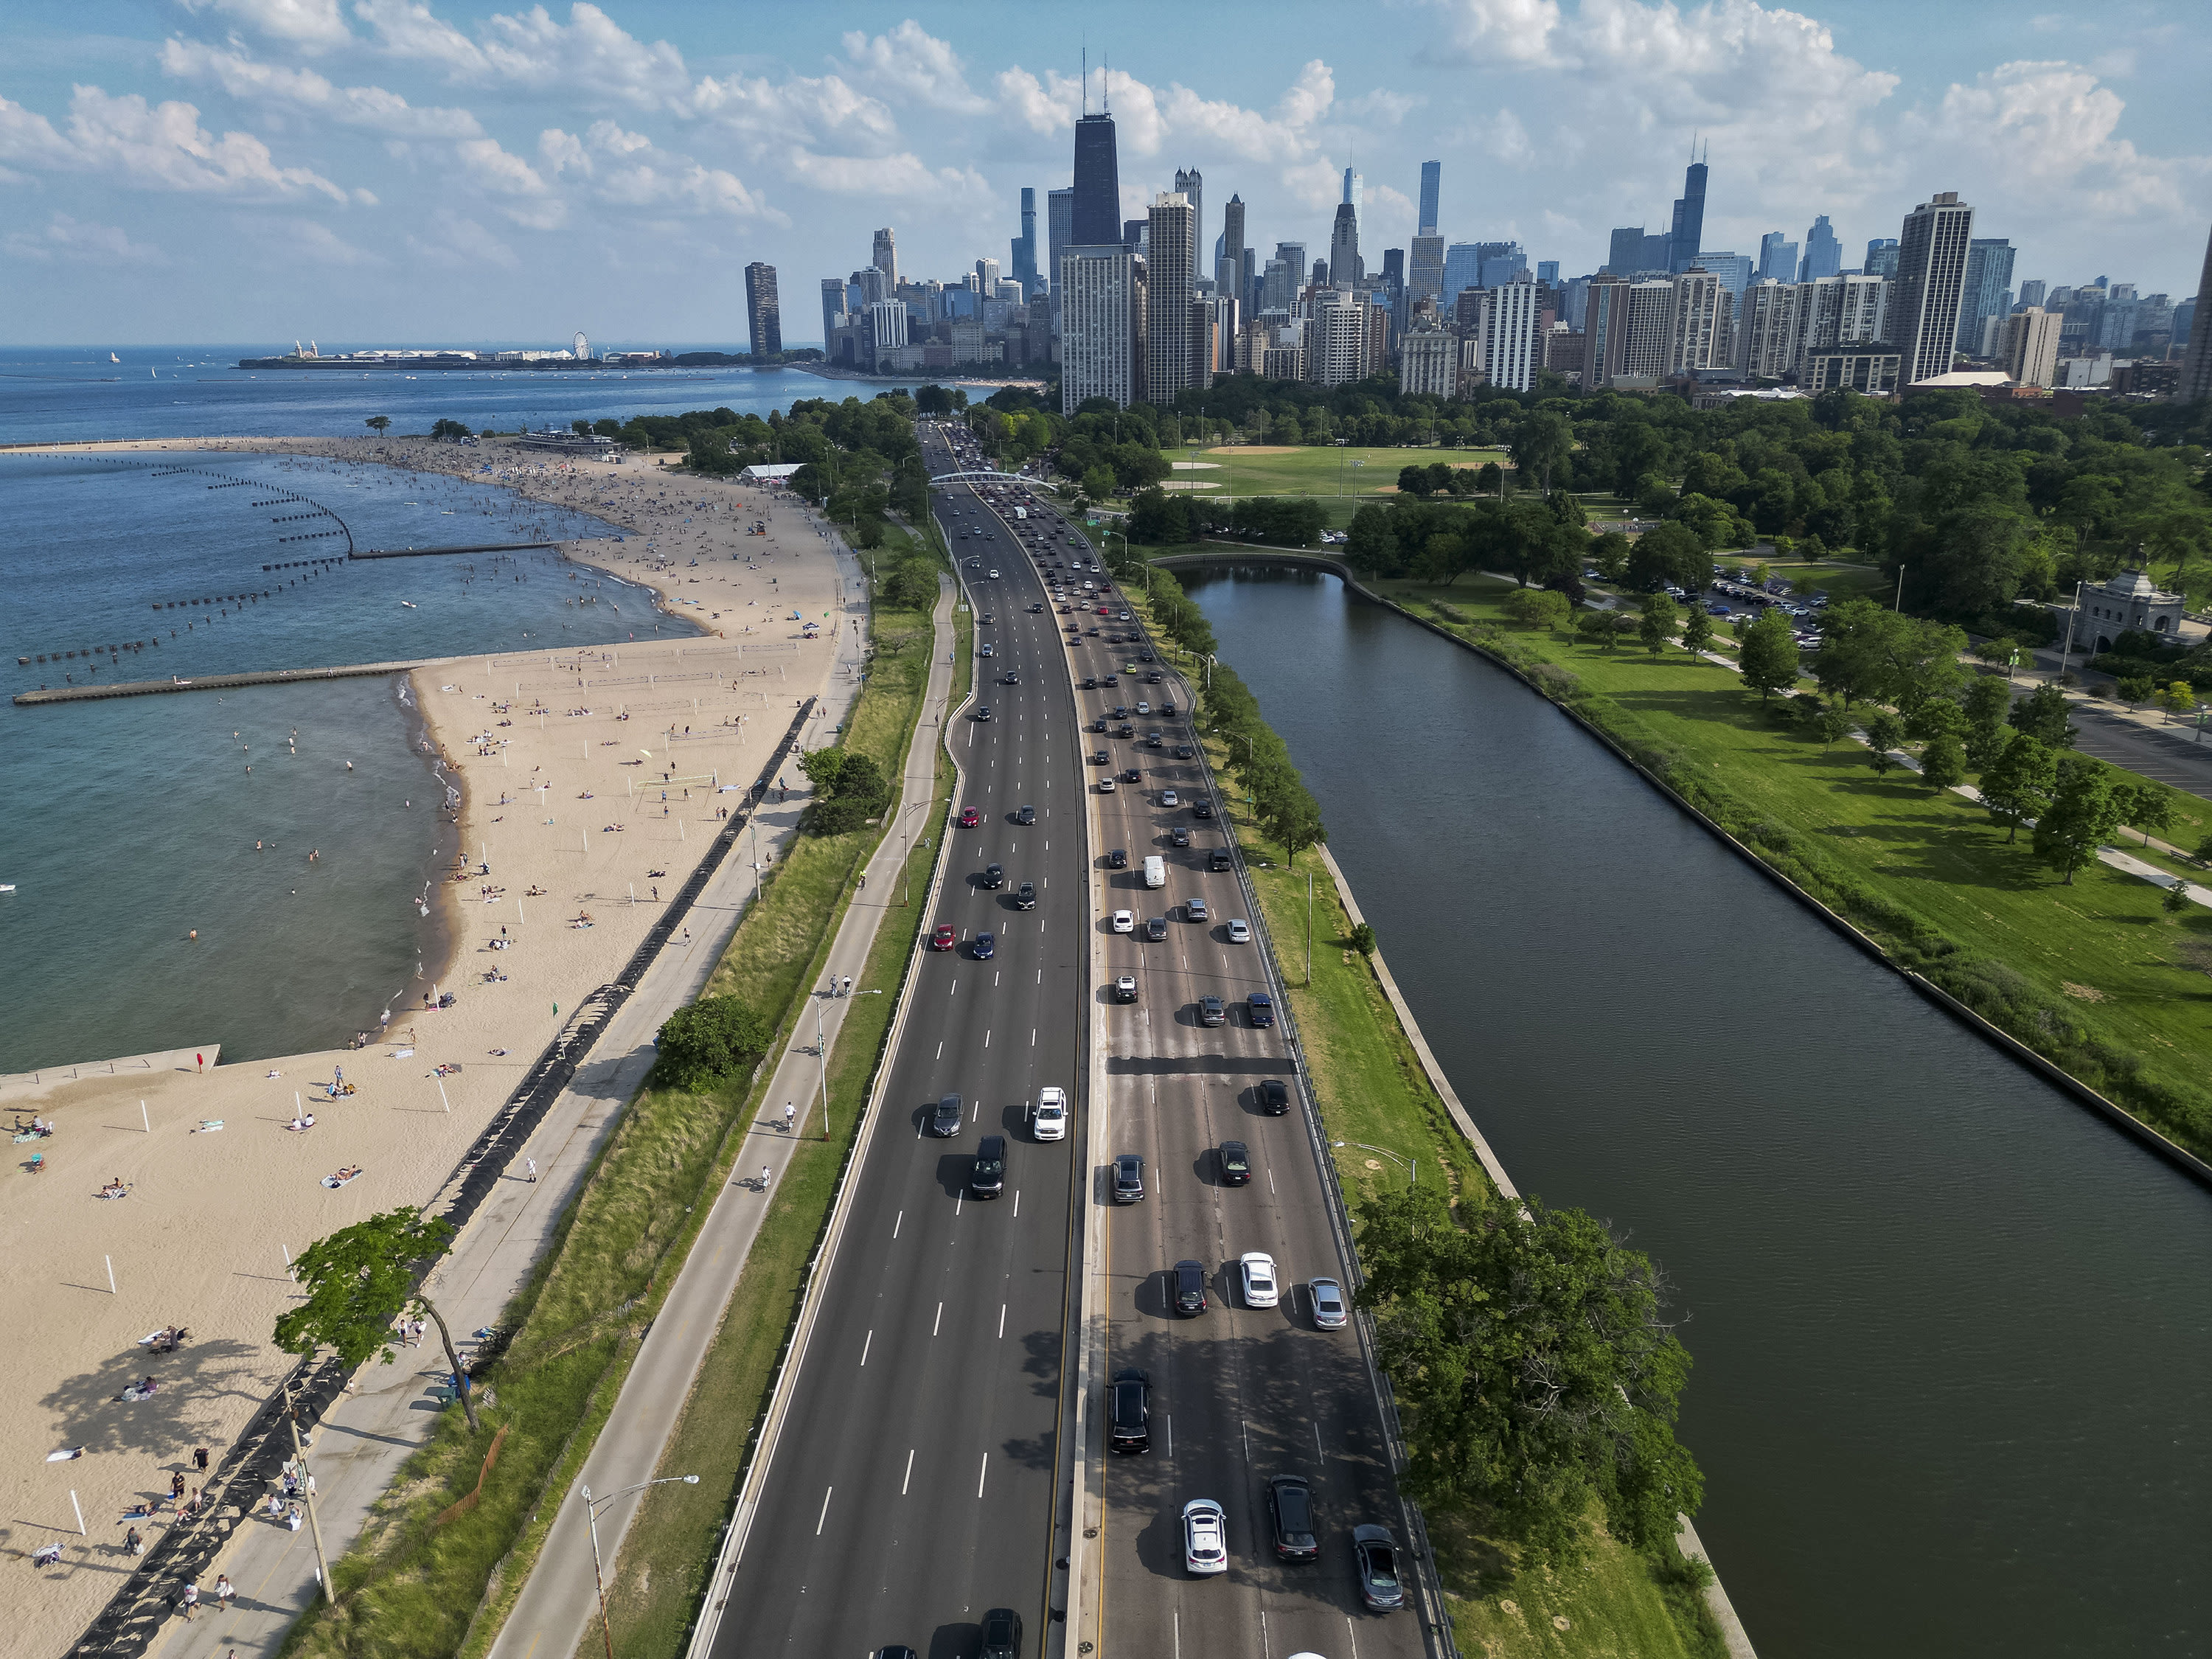 Chicago gets closer to a new north DuSable Lake Shore Drive with more park space